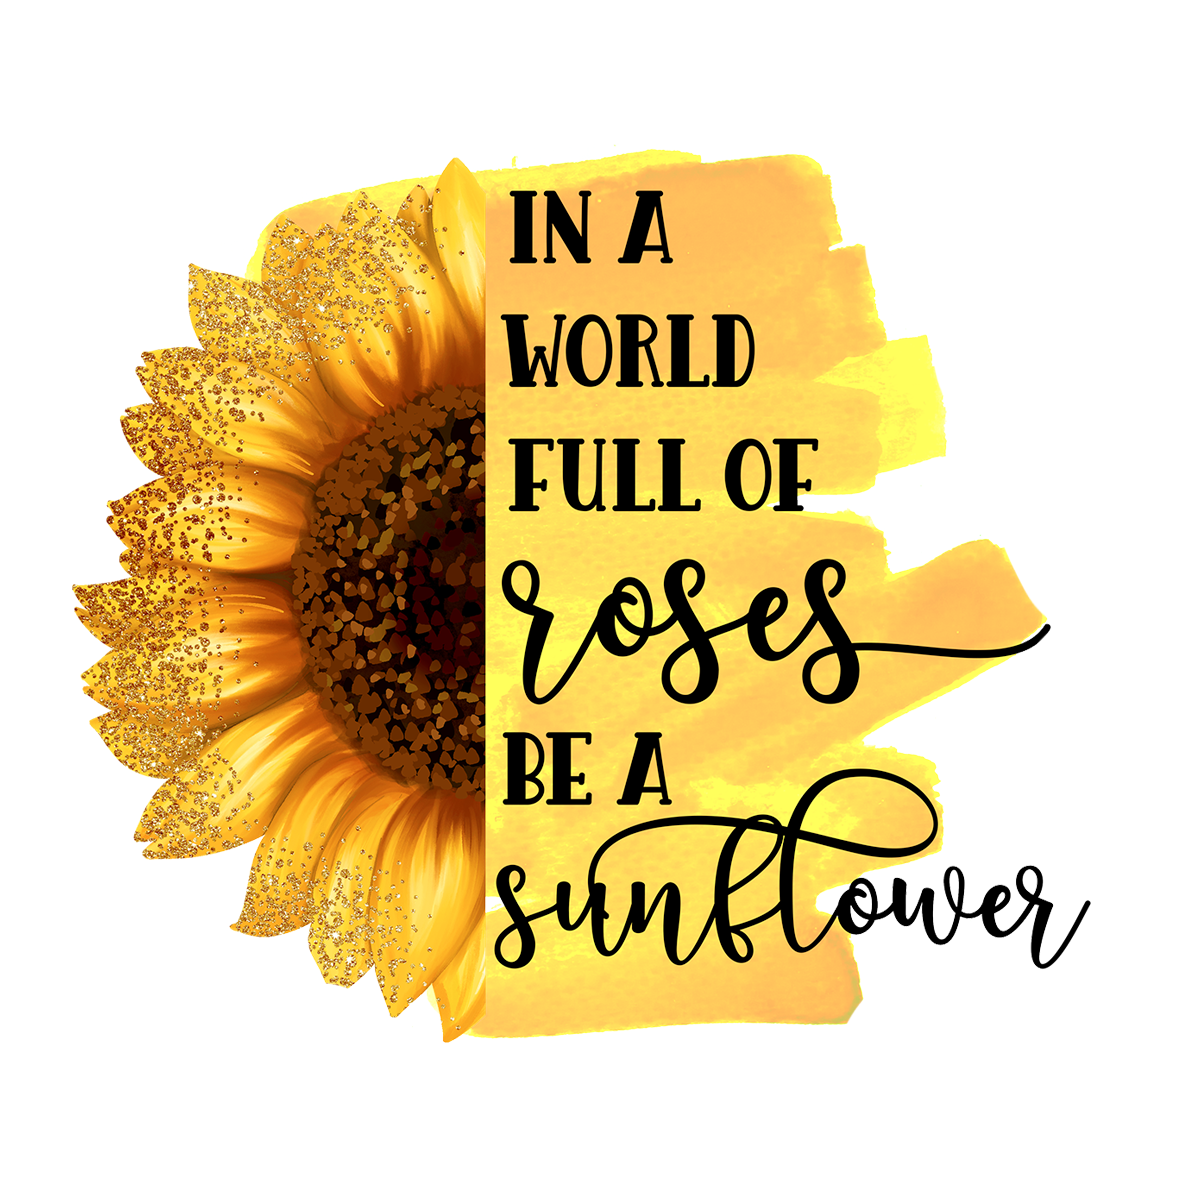 IN A WORLD FULL OF ROSES BE A SUNFLOWER